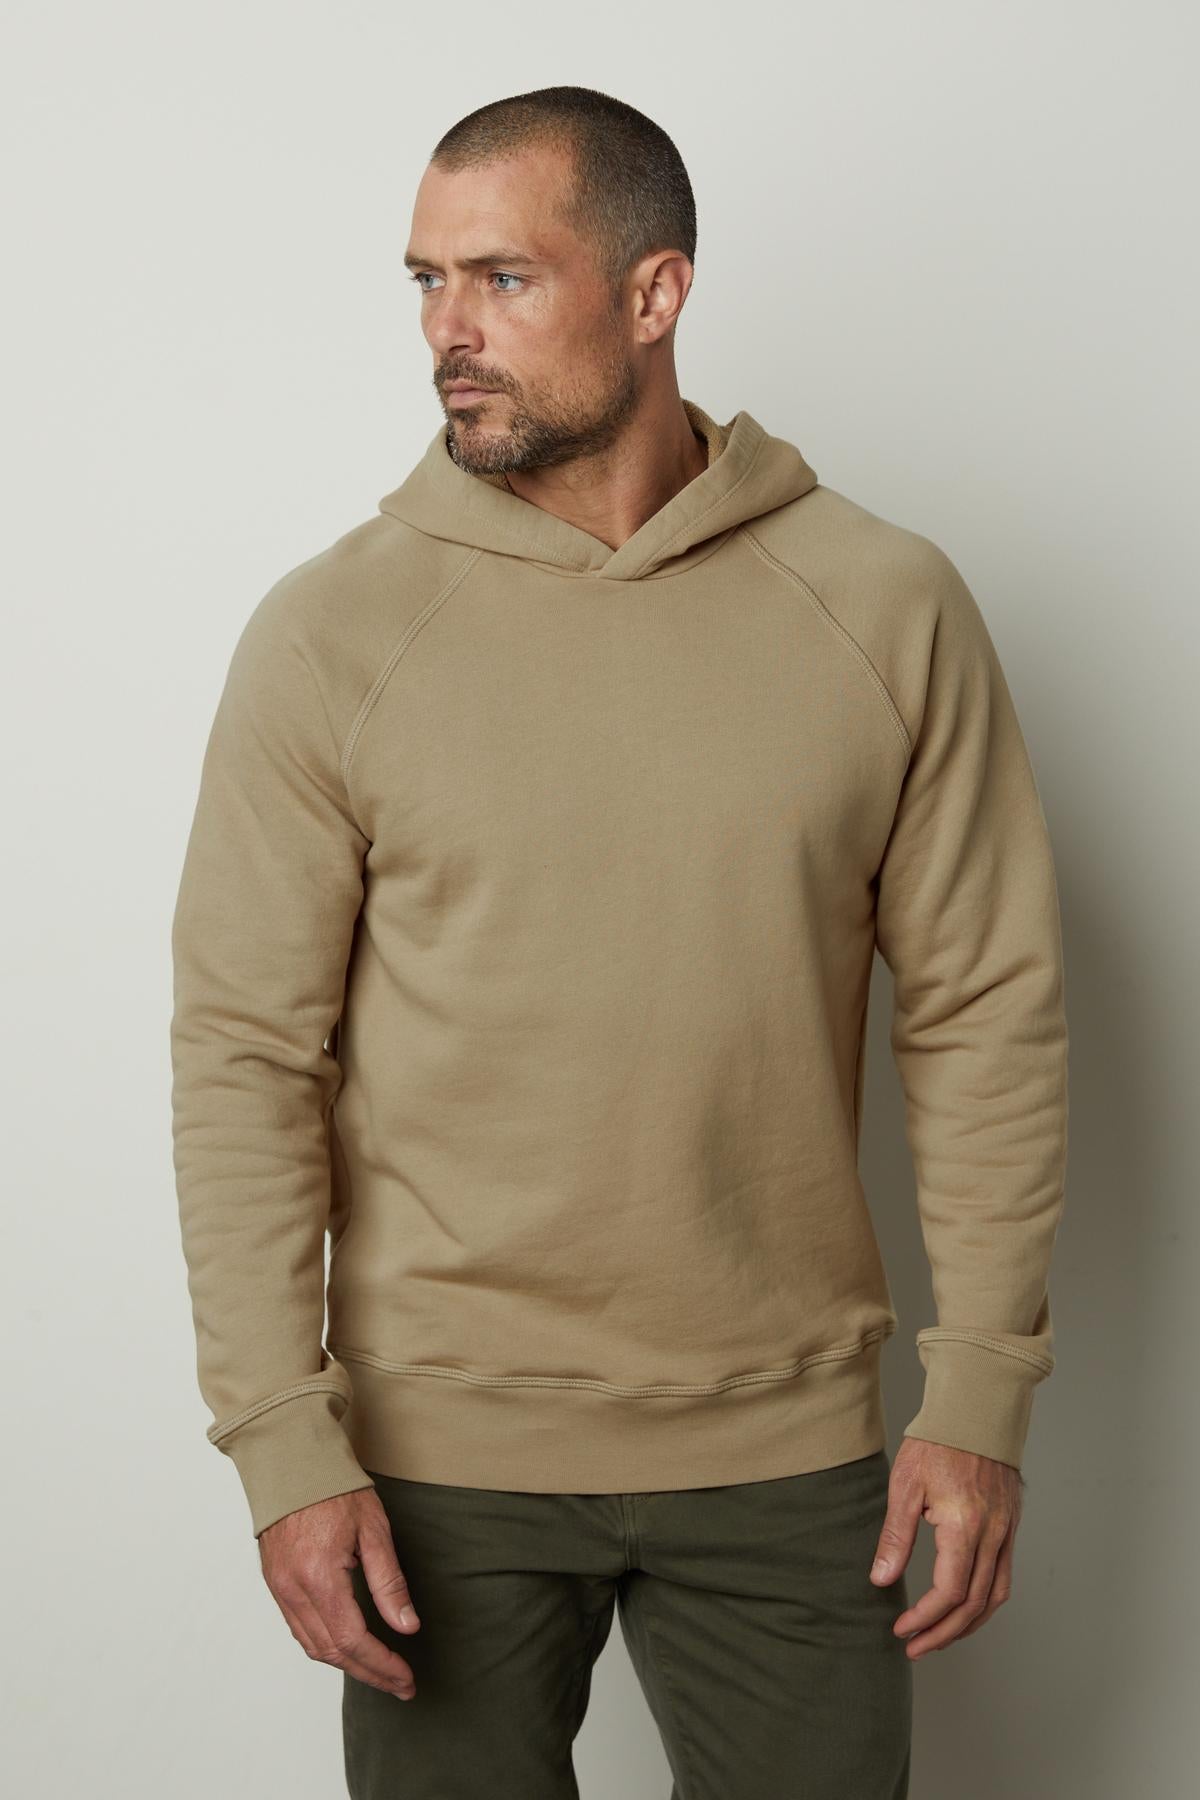 A man wearing a Velvet by Graham & Spencer HOPKIN PULLOVER HOODIE and khaki pants.-35624946925761